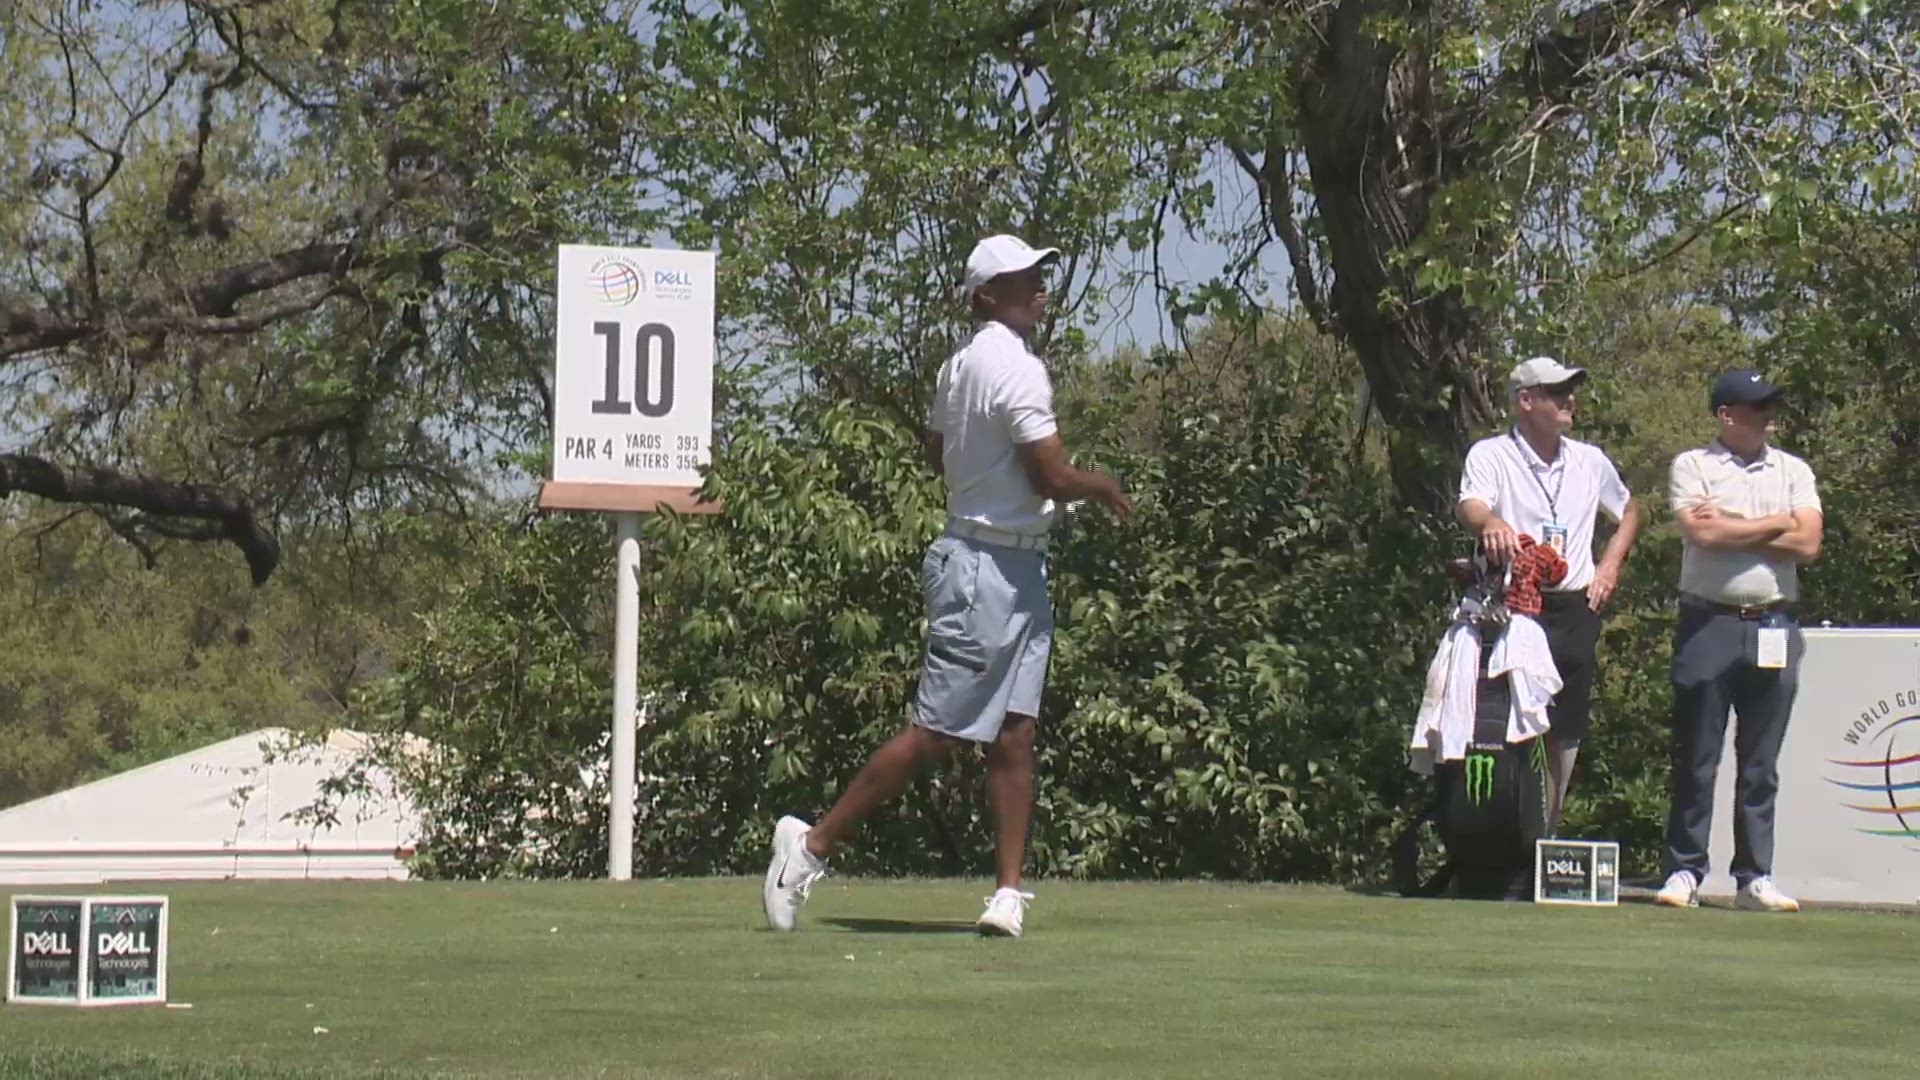 Tiger Woods practices for Dell Match Play Championship in Austin 